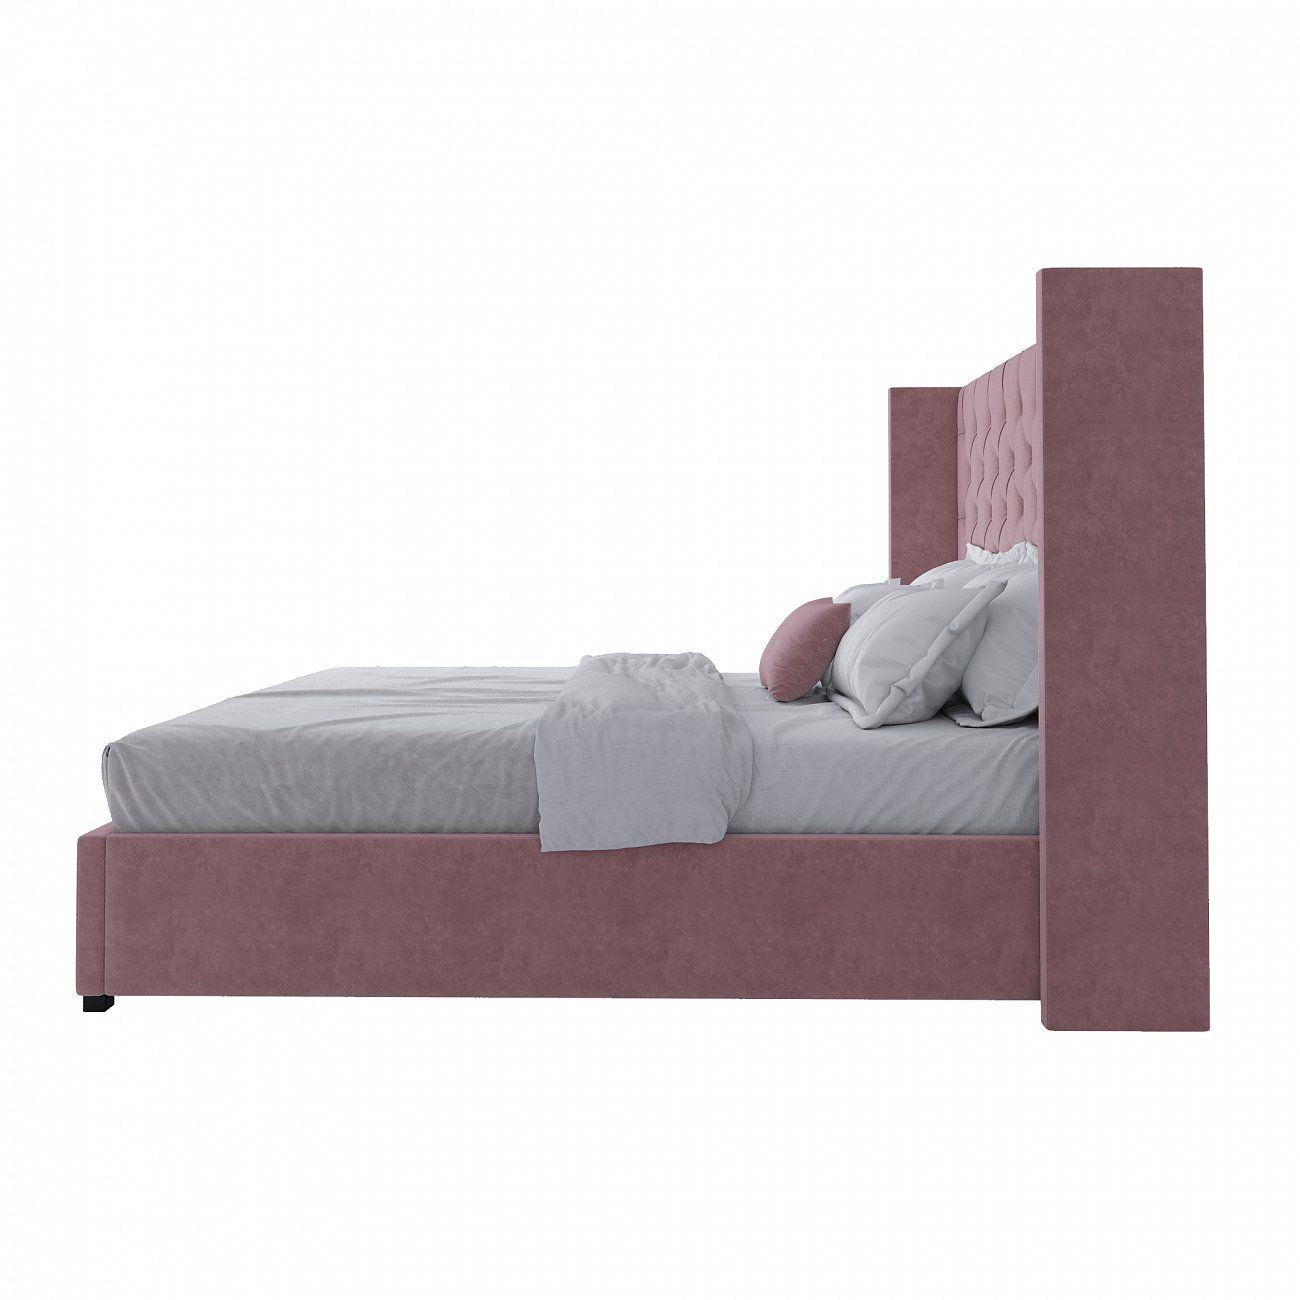 Double bed with upholstered headboard 180x200 cm Dusty Rose Wing-2